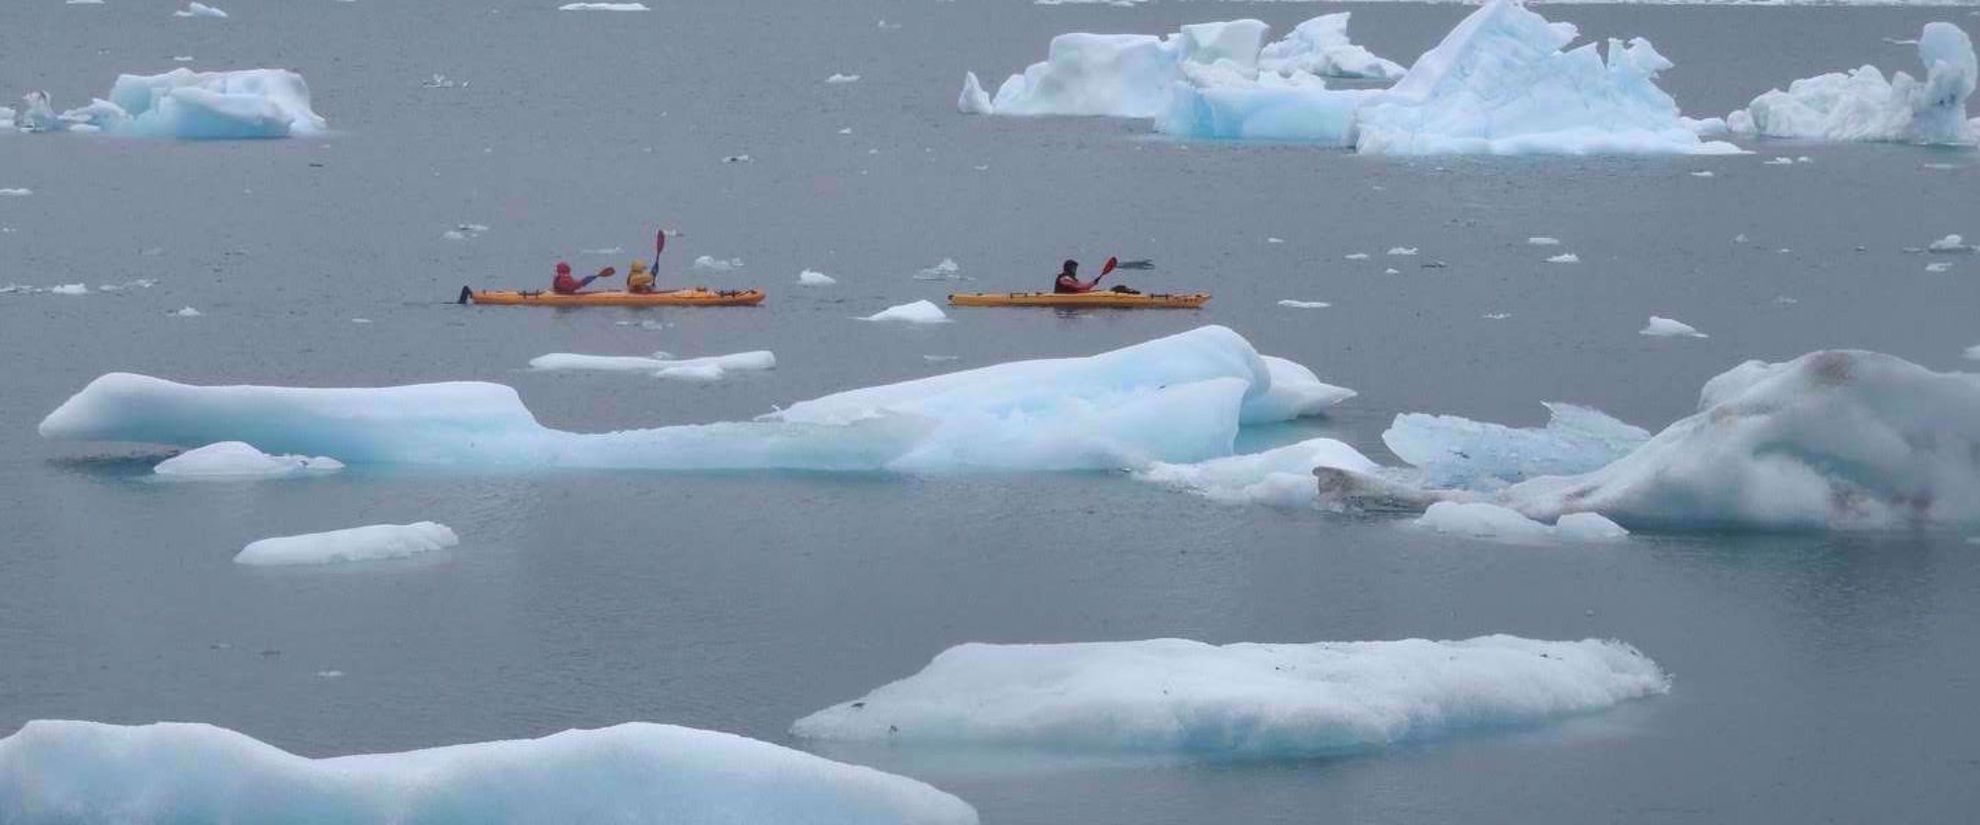 kayaking in greenland with icebergs